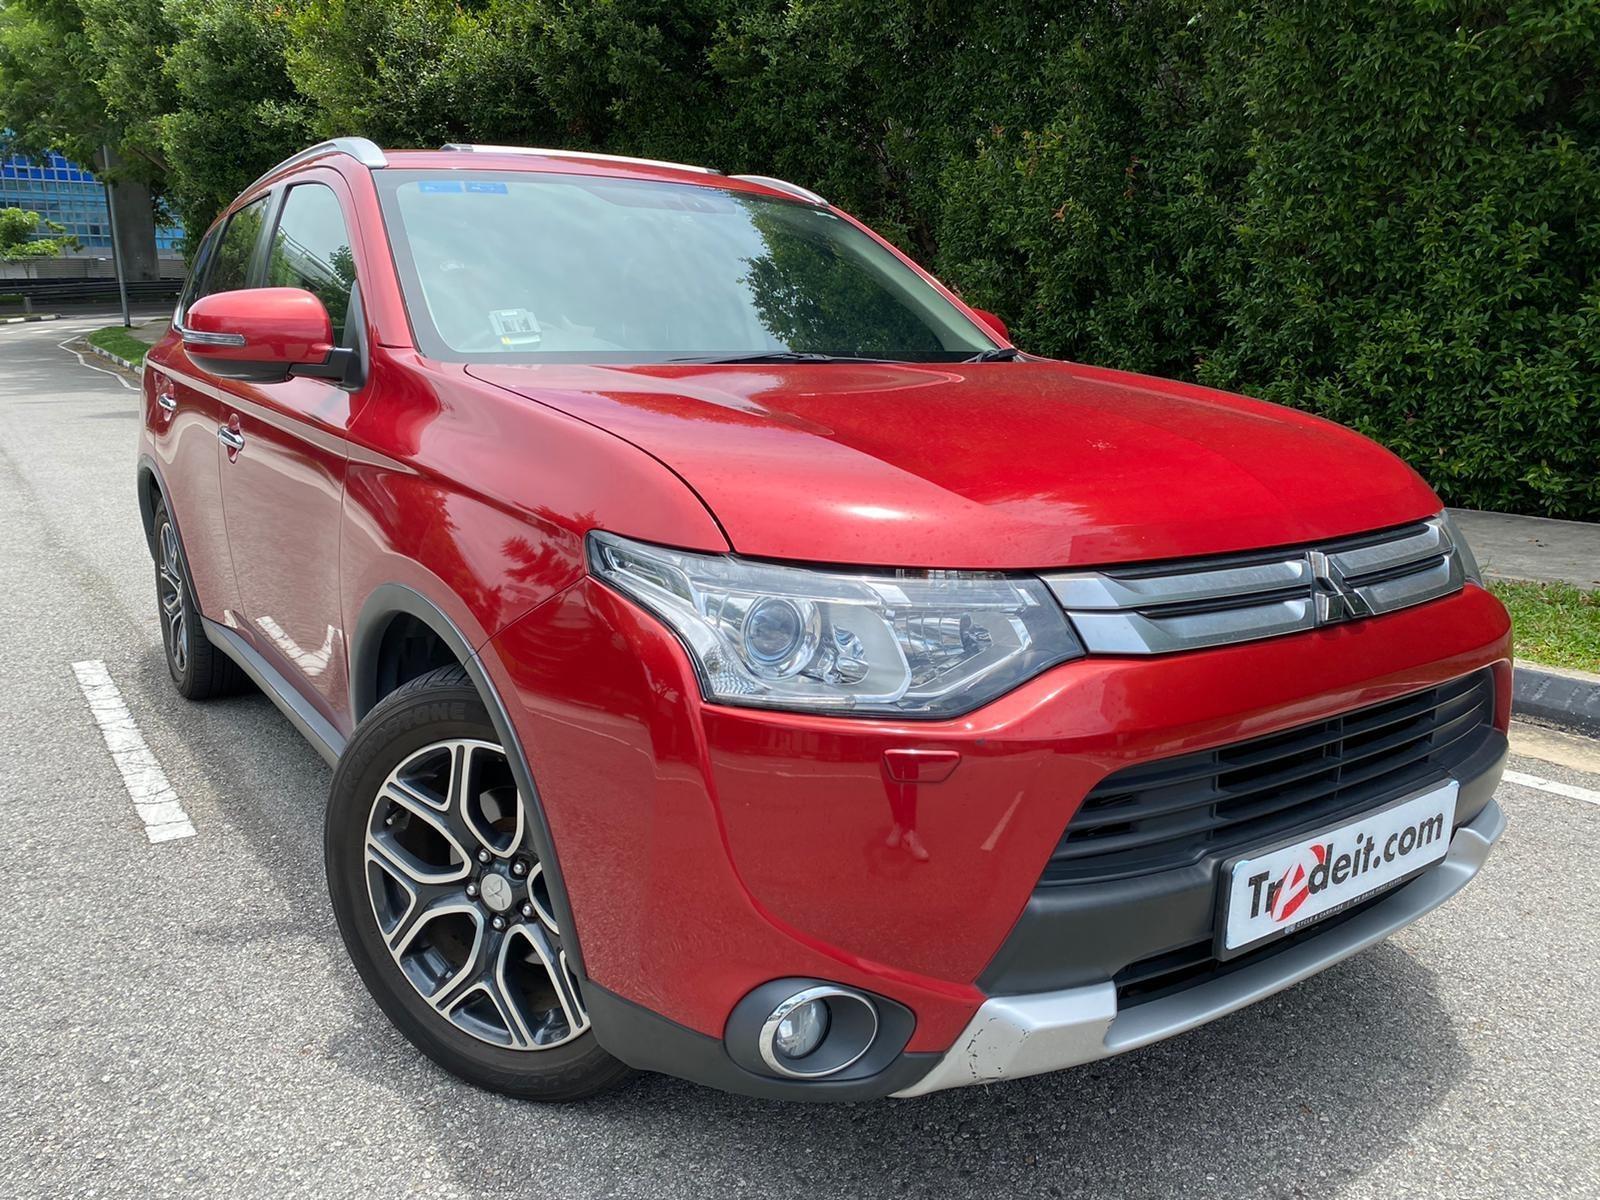 Mitsubishi Outlander 2 4 Cvt Abs D Cars Used Cars On Carousell